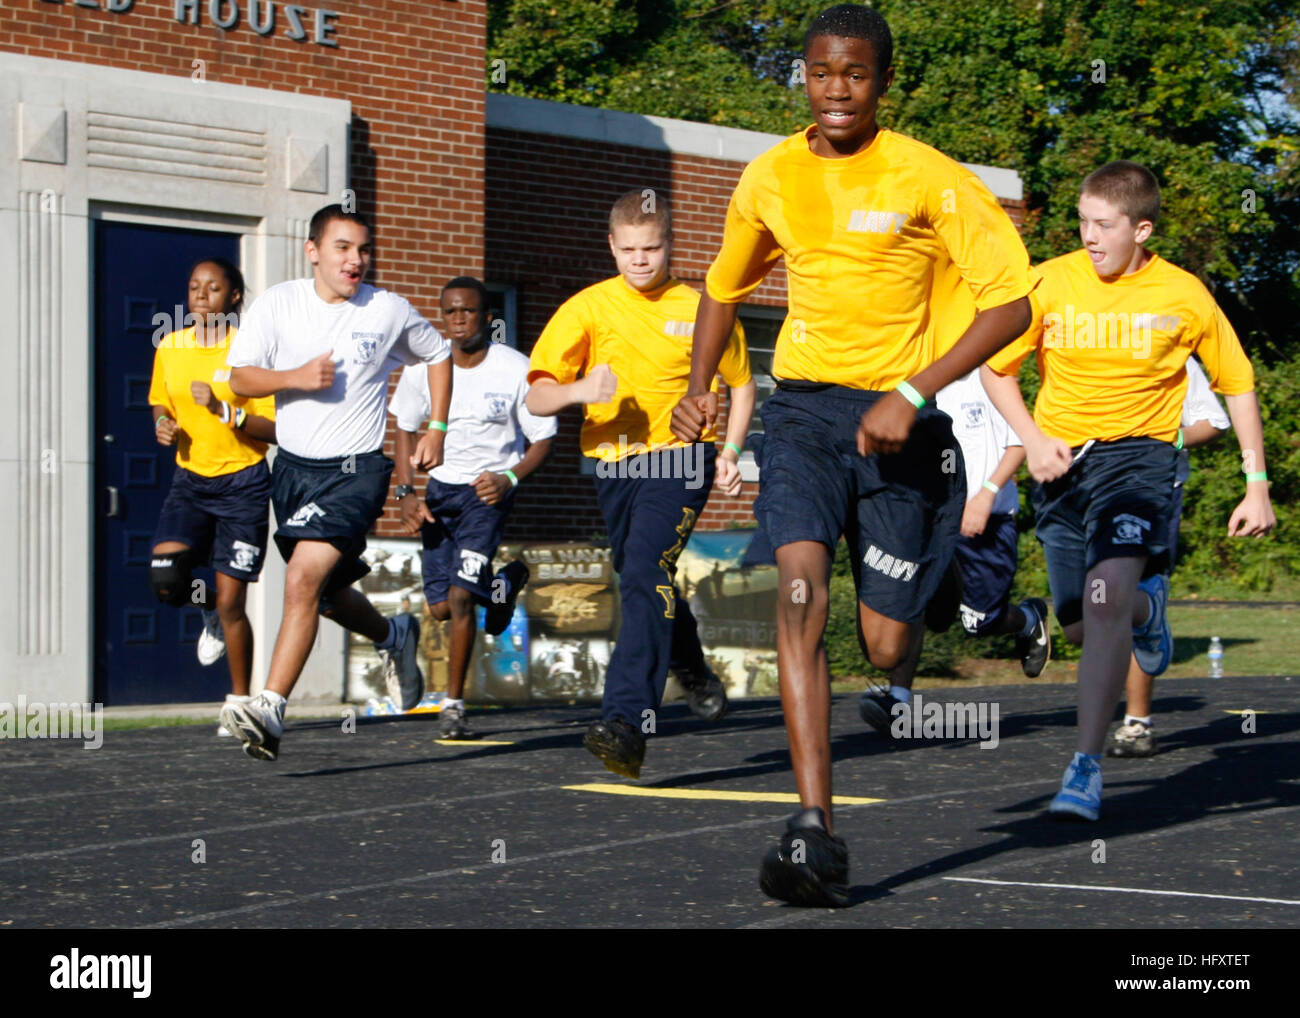 091003-N-5366K-068  GREENSBORO, N.C. (Oct. 3, 2009) Navy Junior ROTC members begin a 1.5-mile run during a Navy SEAL Fitness Challenge held at Grimsley High School.  Naval Special Warfare (NSW) operators hosted the event, which included a 500-yard swim followed by push-ups, sit-ups, pull-ups and the run, in an effort to promote fitness among Americans and to raise awareness about NSW programs. (U.S. Navy photo by Mass Communication Specialist 2nd Class Michelle Kapica/Released) US Navy 091003-N-5366K-068 Navy Junior ROTC members begin a 1.5-mile run during a Navy SEAL Fitness Challenge held at Stock Photo